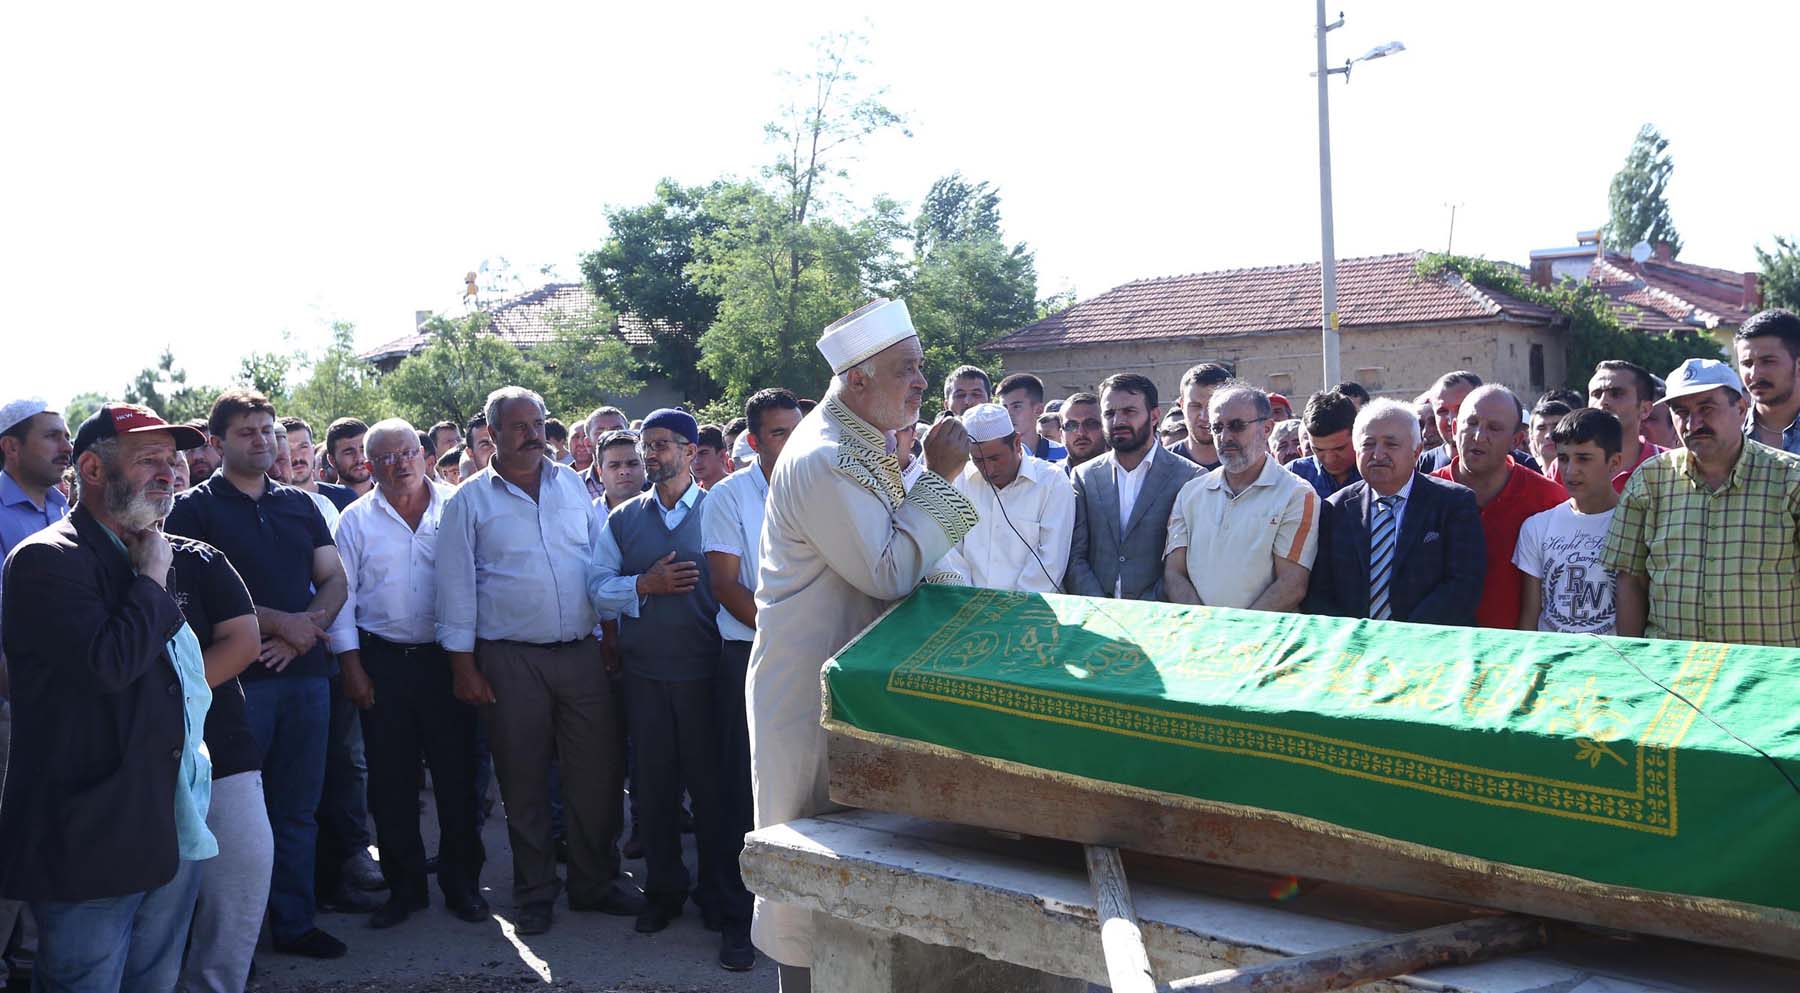 Kazan mufti Halil Karagöz, who performed the funeral prayer, said: “We leave all traitors, dishonest people, FETÖ members and parallel state members who are burning with so much hate to crush people under a tank to God. God damn them! Thanks to our martyrs, our nation and our motherland survived when they were at the edge of a cliff. Hopefully, God will never test us with similar pain. We are grateful for our martyrs. I hope God is too. Let them rest in peace in heaven.”